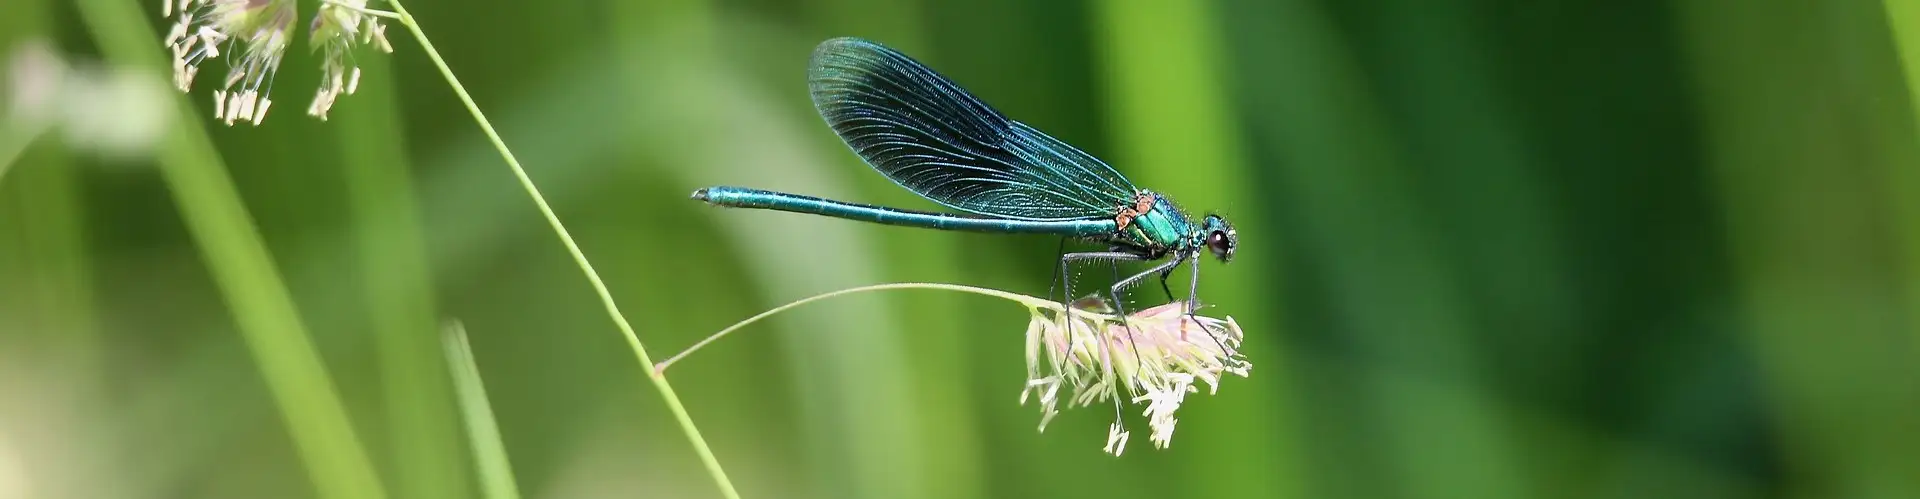 solitaire dragonfly